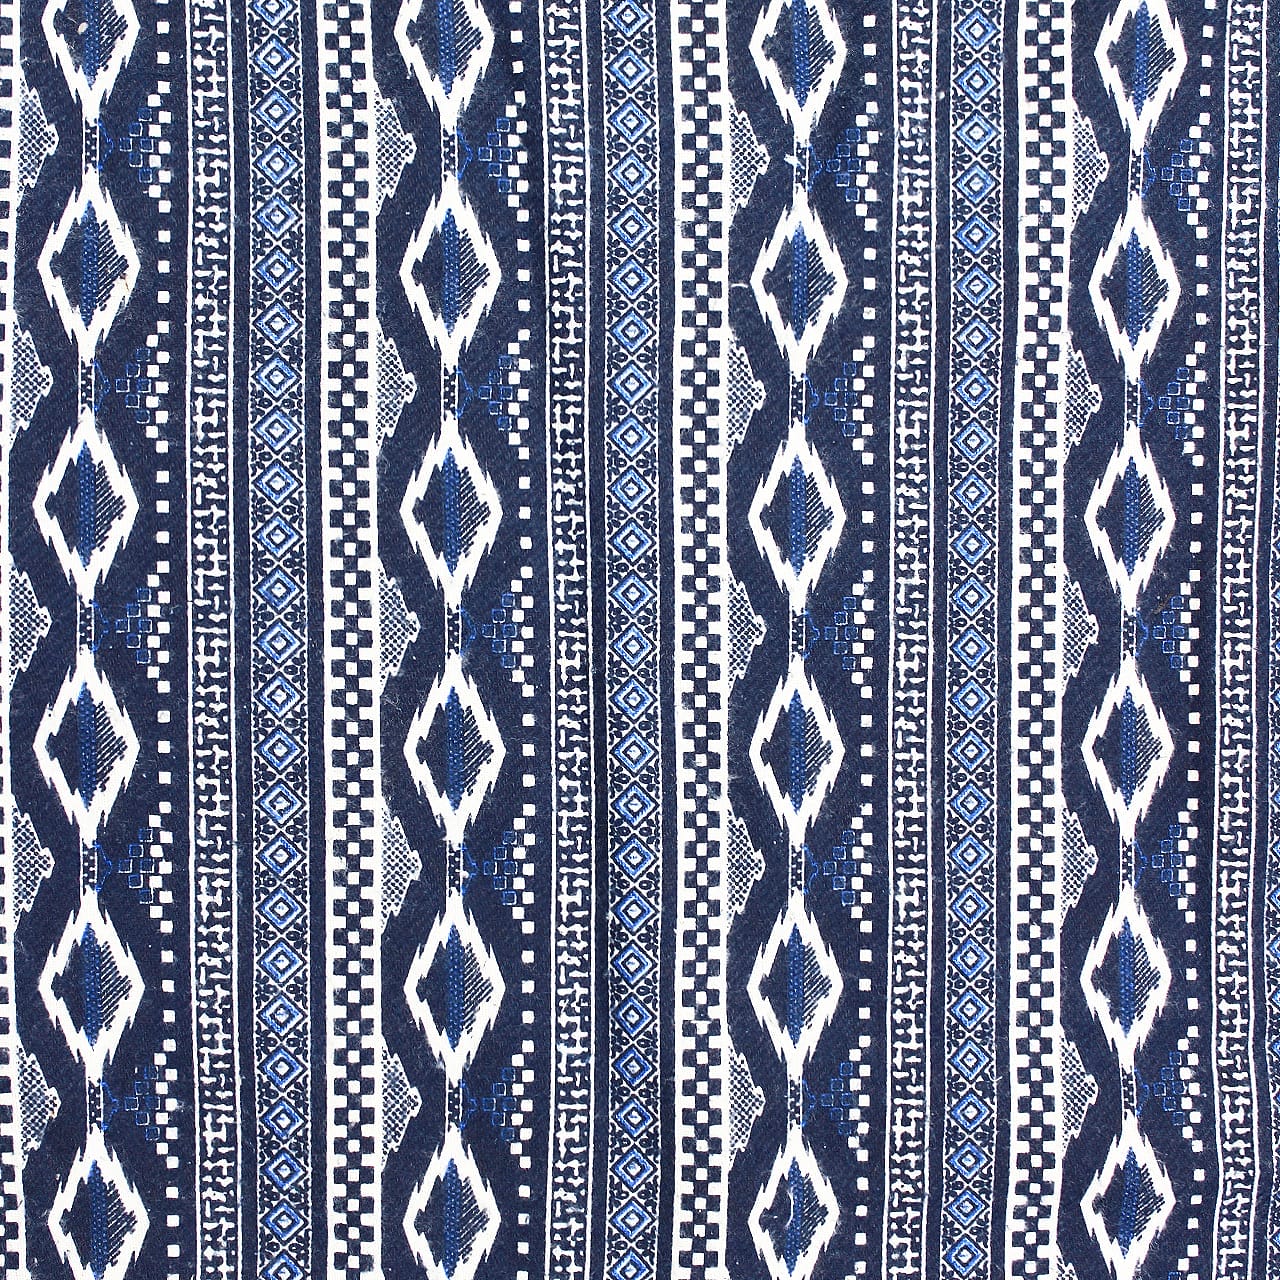 Sofe Blue Print Cotton Traditional Geometrical Diwan Set(6 Pcs) online in India